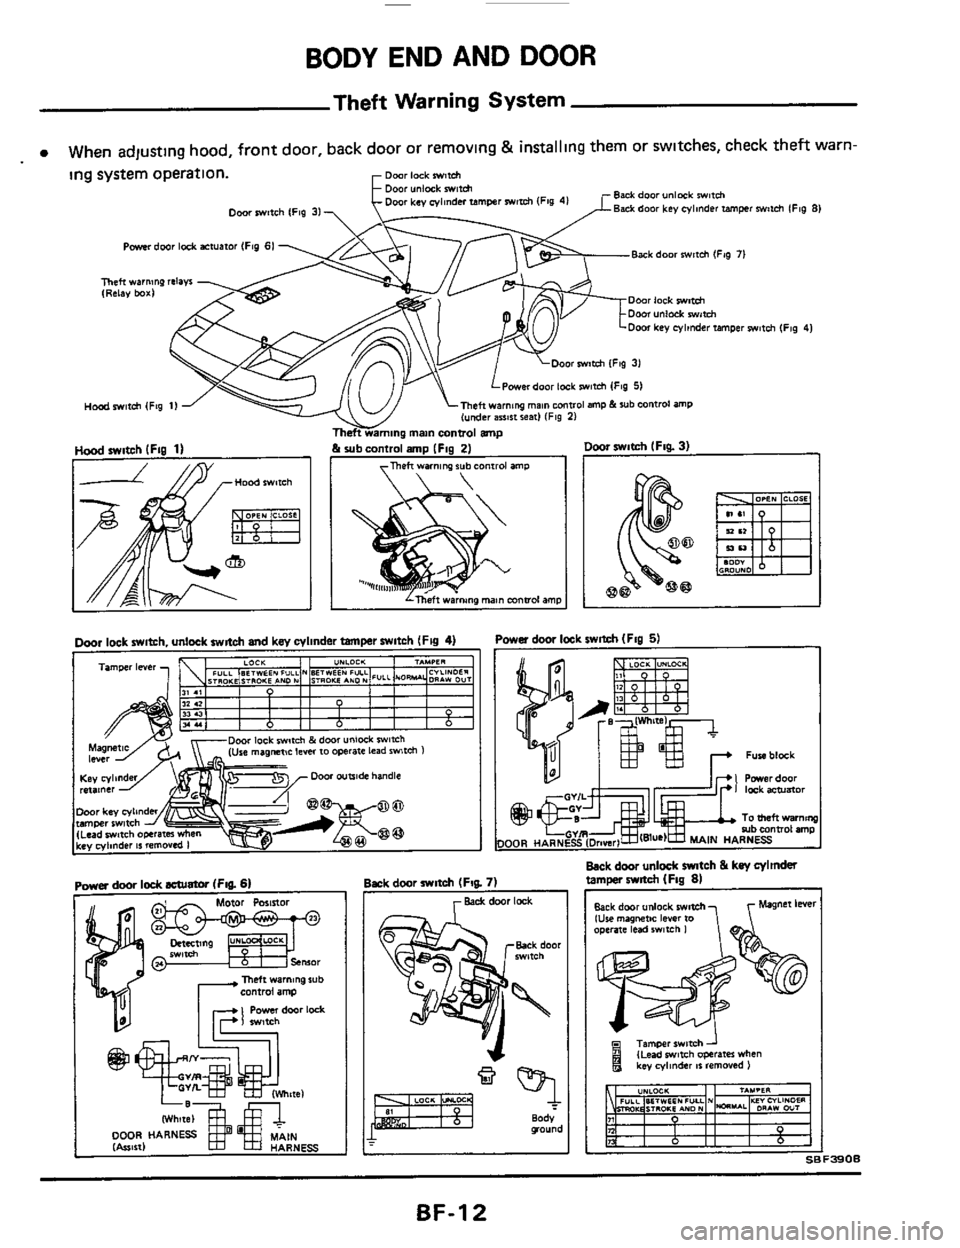 NISSAN 300ZX 1984 Z31 Body Workshop Manual BODY END AND DOOR 
Theft Warning System 
. When  adlustlng hood, front door,  back door  or removing & installlng  them or swltches,  check theft warn- 
ing  system  operation. 
Back dooiunlkk witch 
